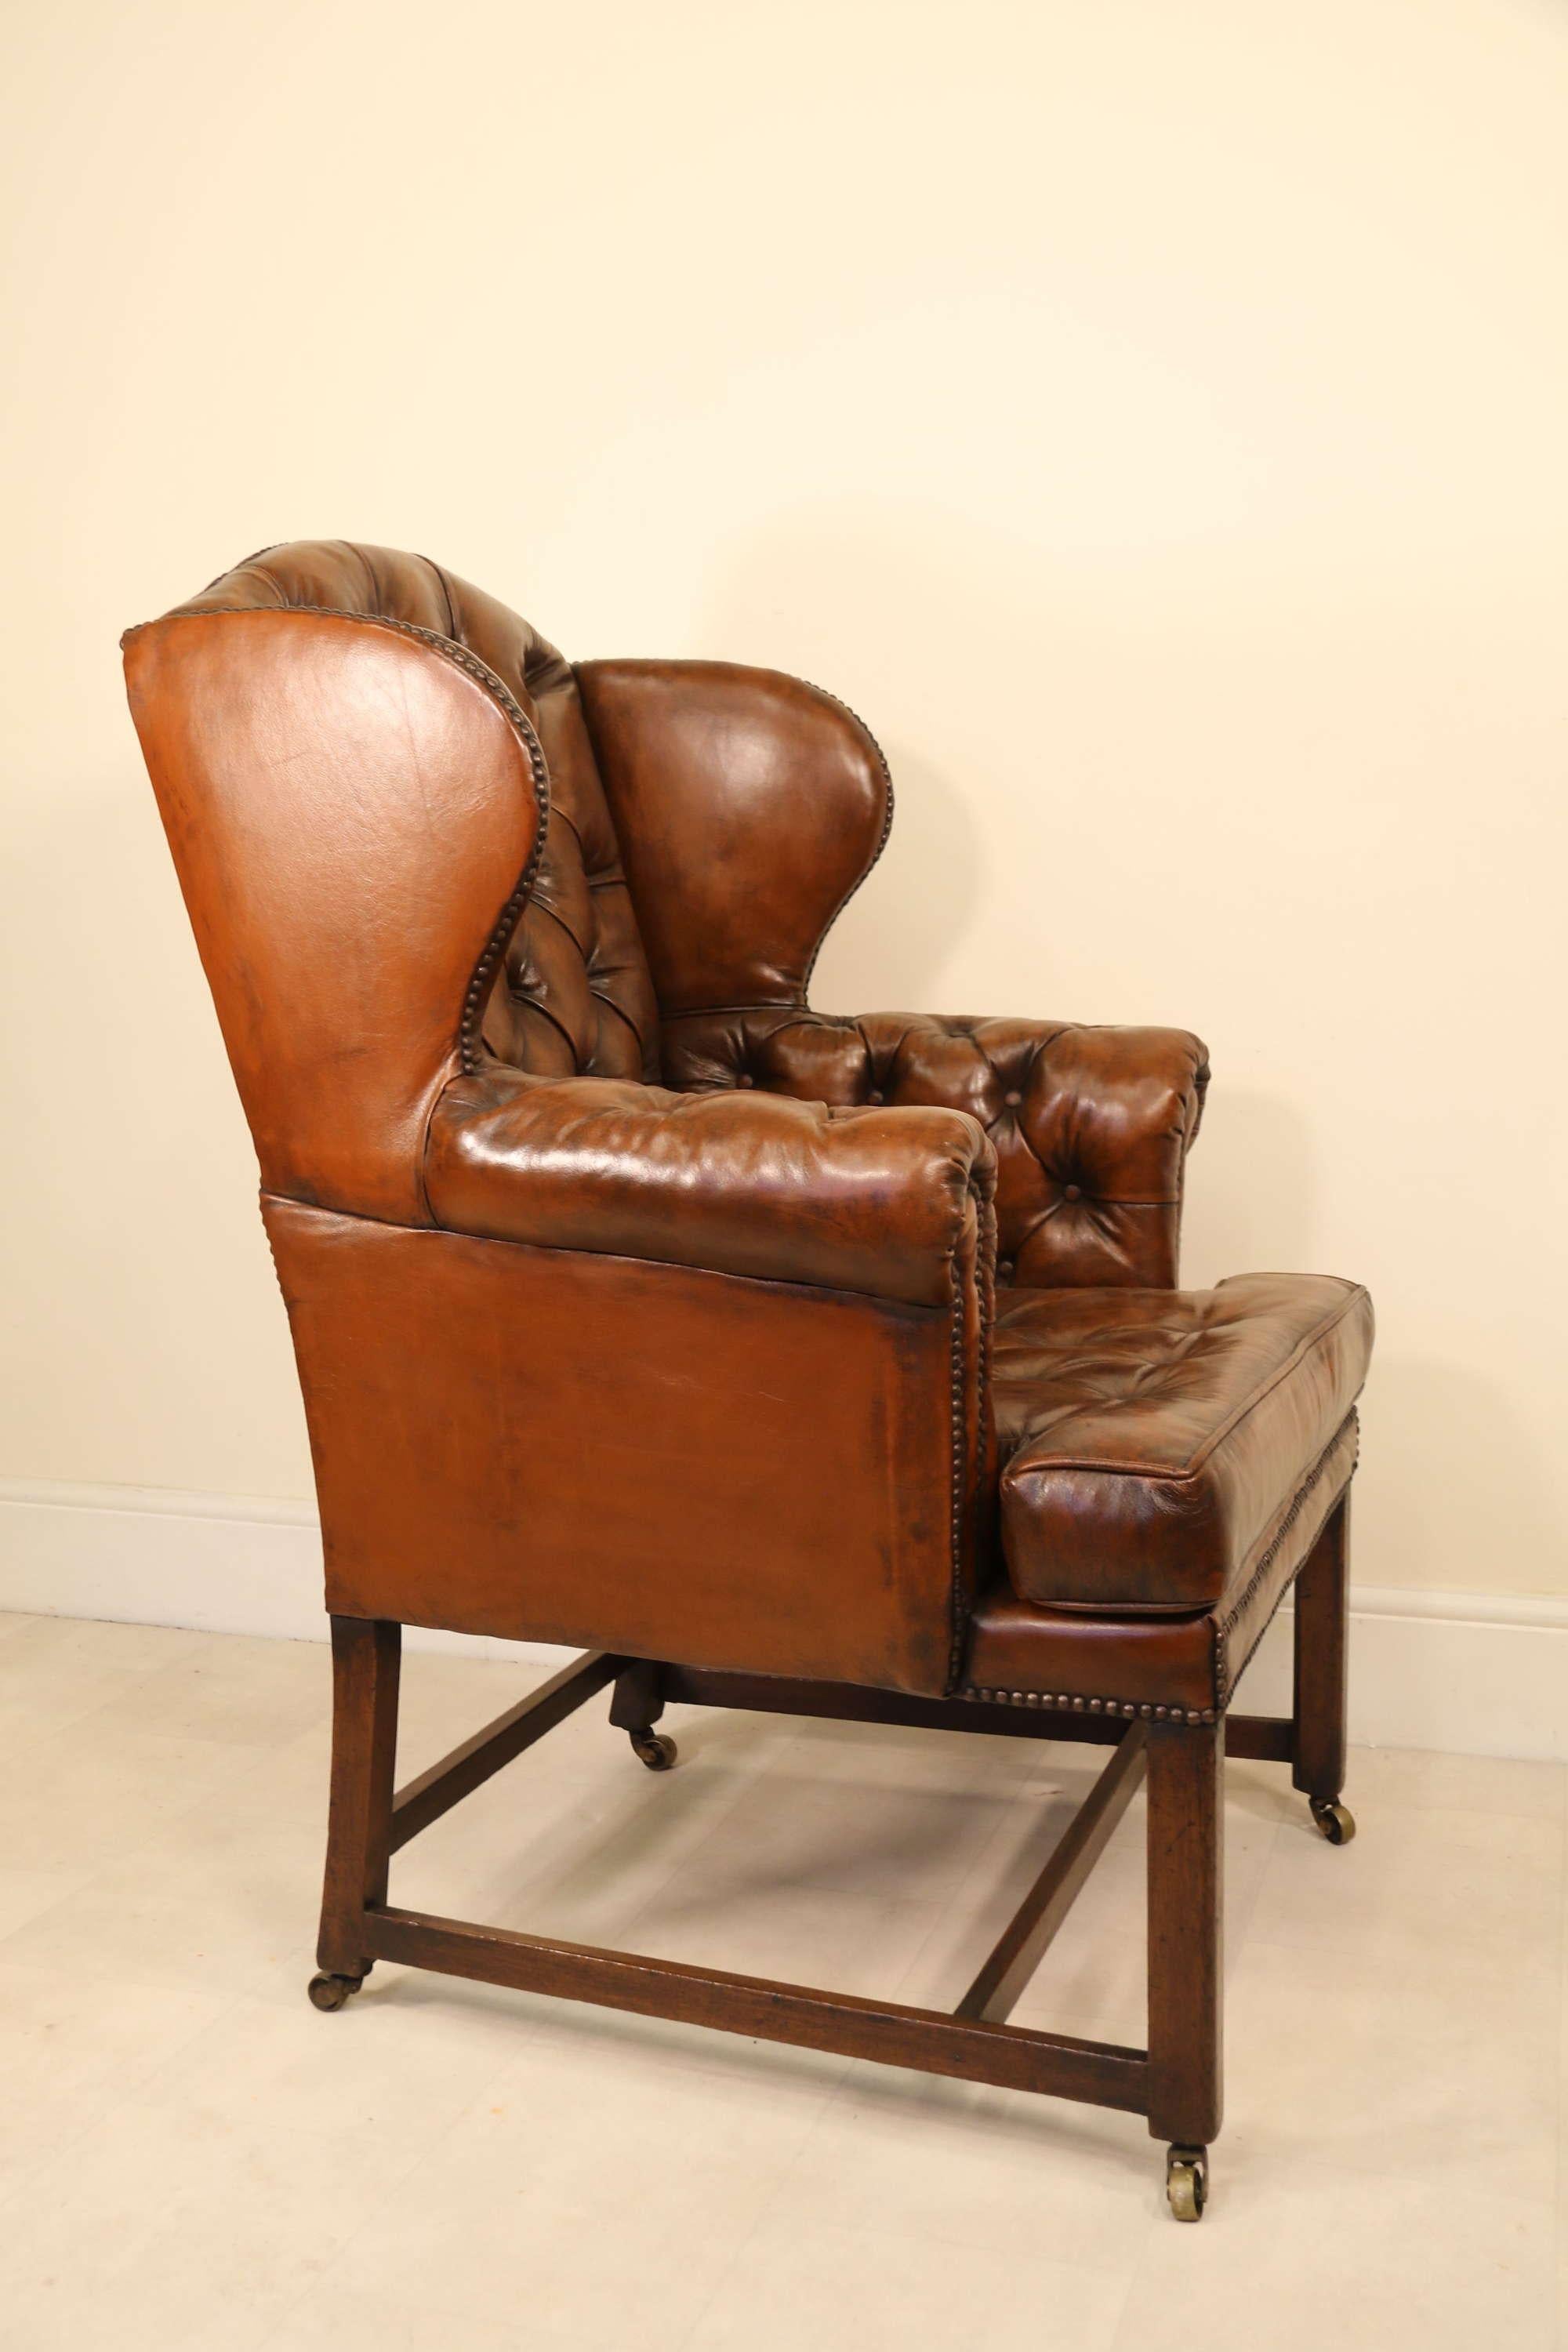 18th Century Large Leather Upholstered Wingback Armchair, Georgian

This handsome and larger scale George iii wing backed armchair has recently been finely reupholstered in deep buttoned dark tan leather which has been hand finished to give a well